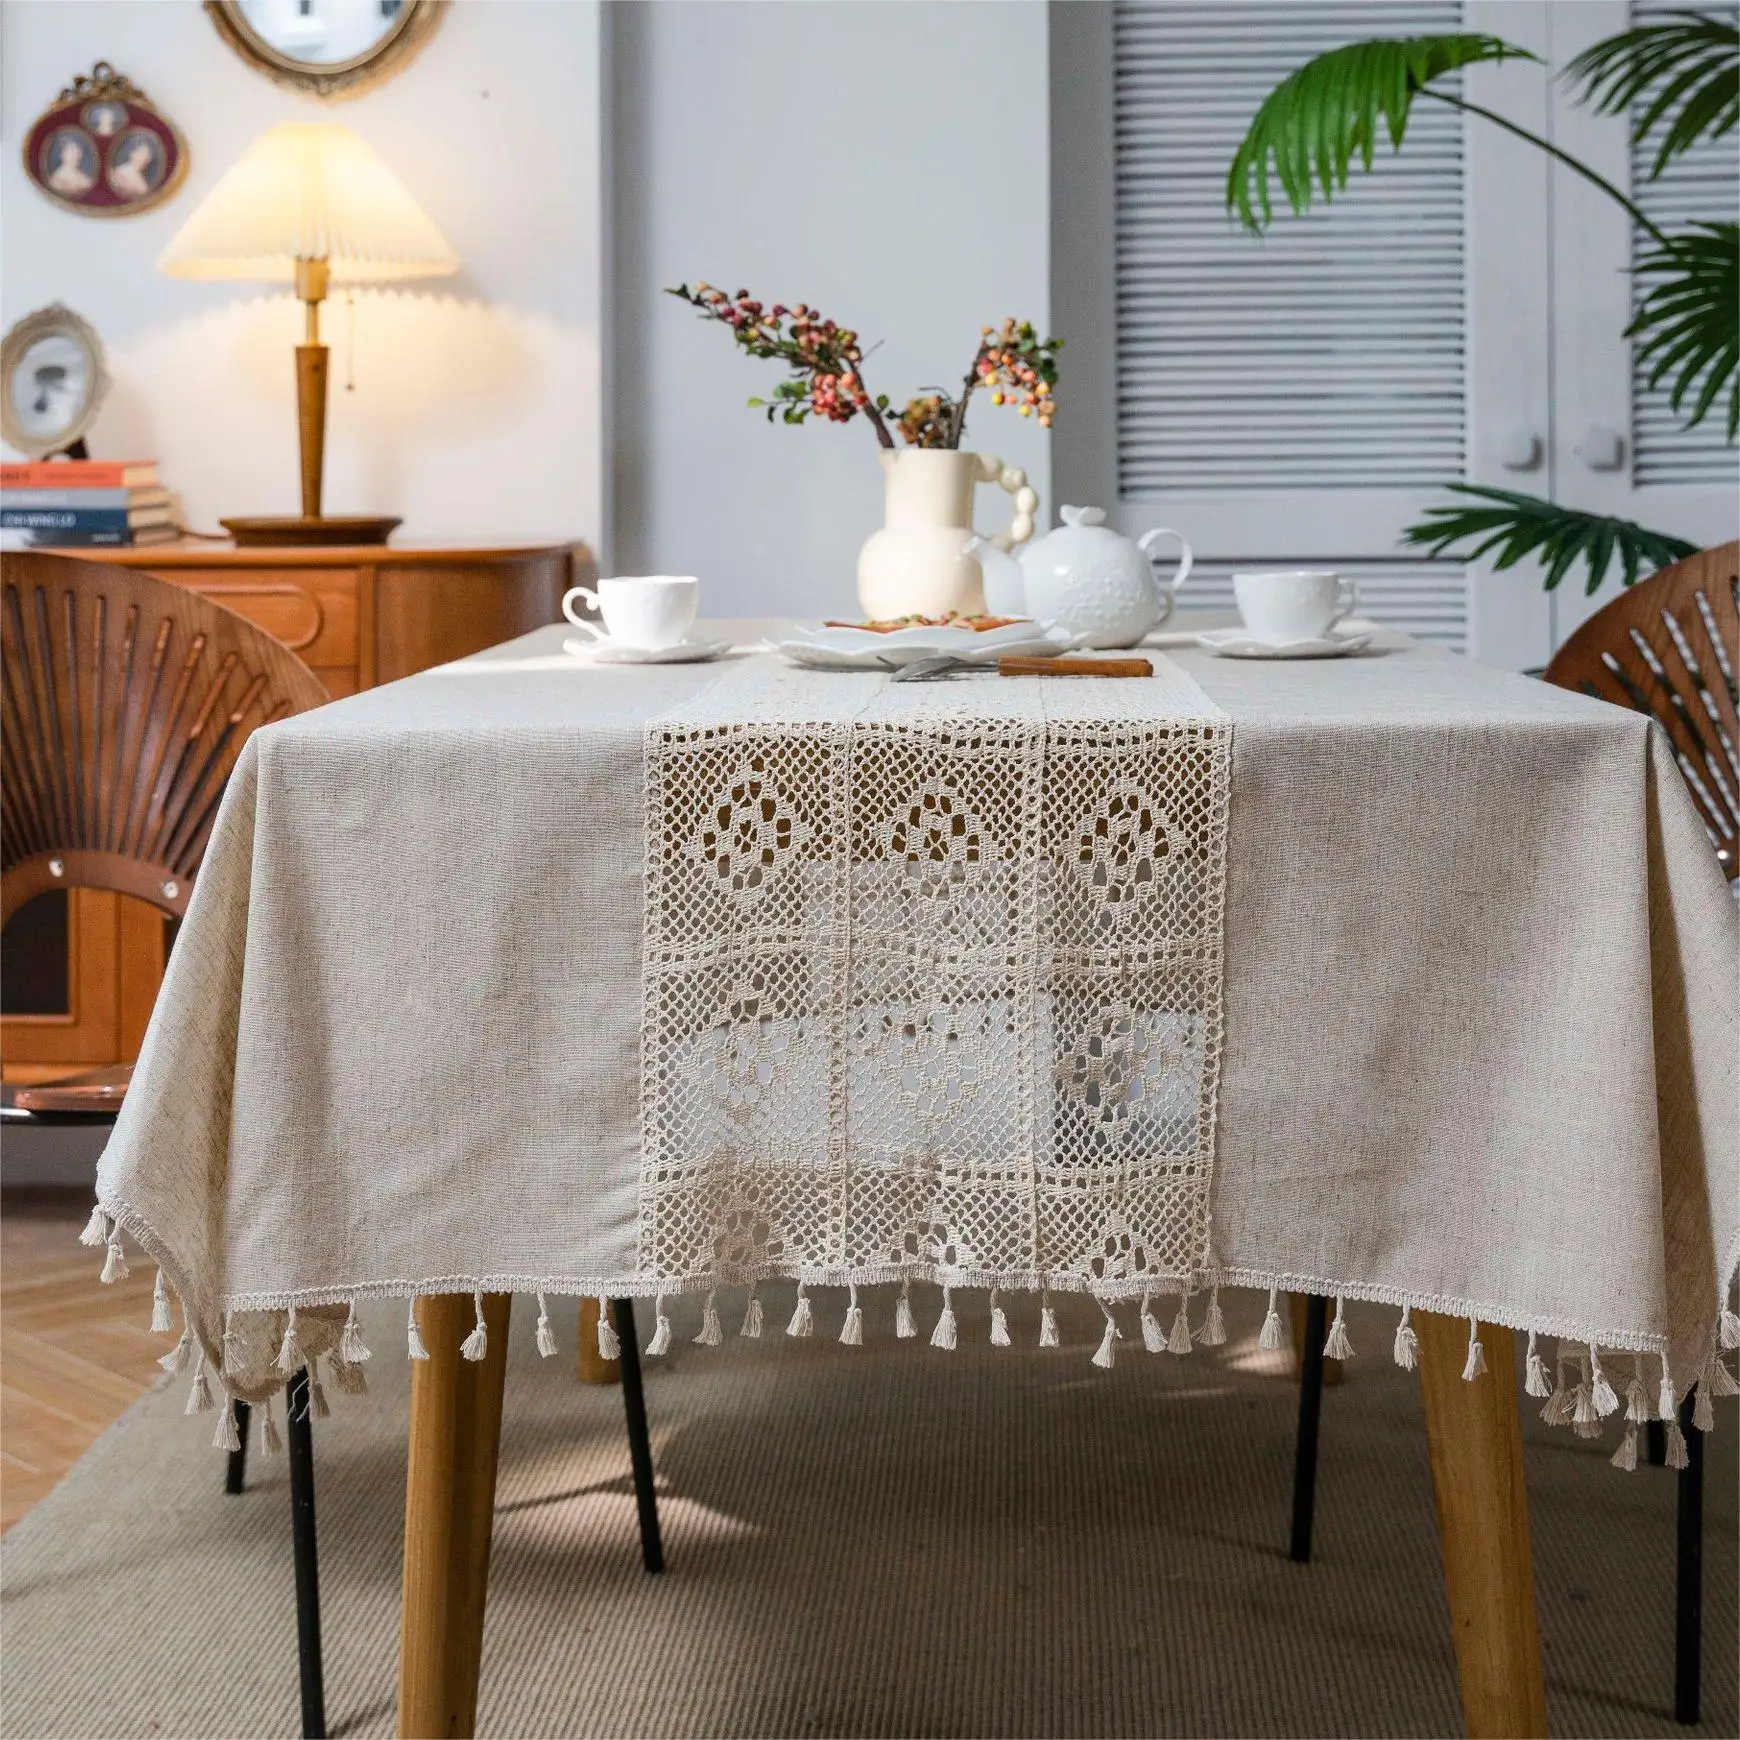 European Beige washable customize size tablecloths table cloths table linen home wedding hotel party restaurant